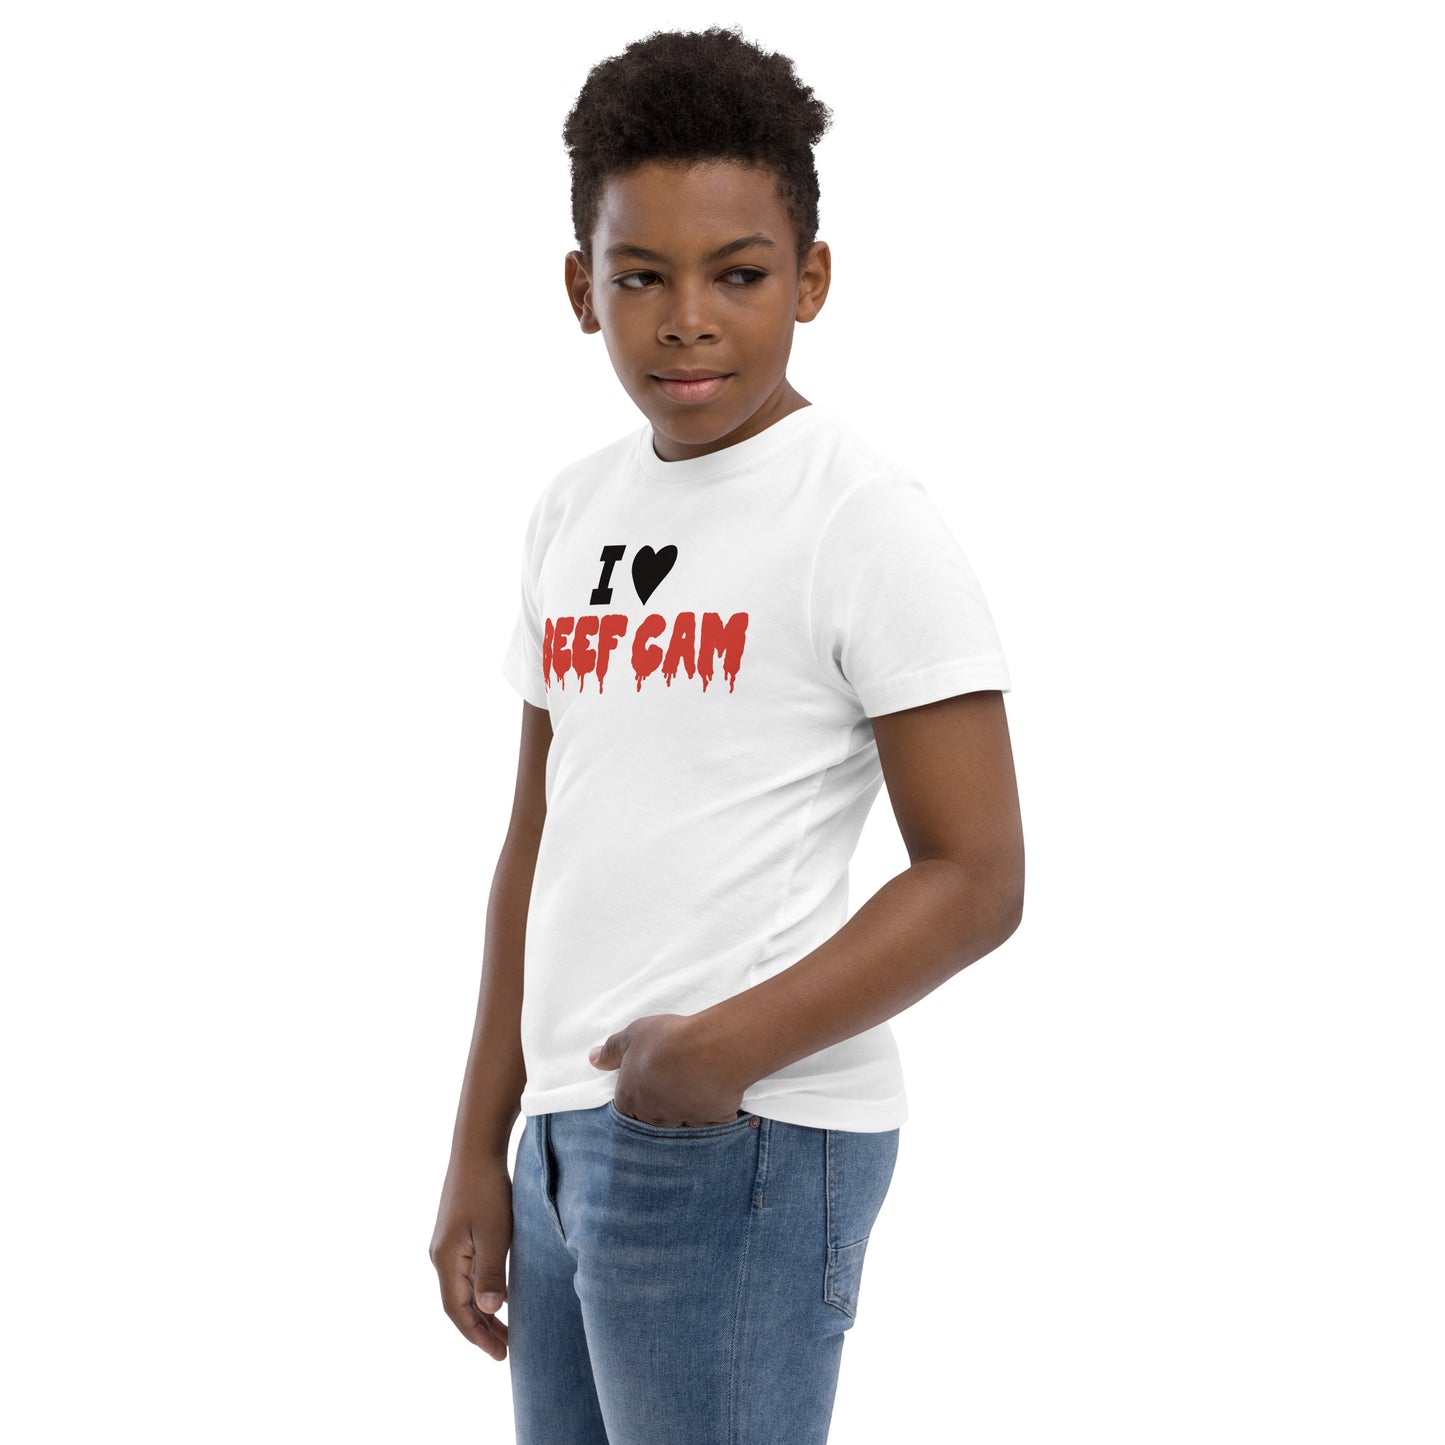 I ❤️ BEEF CAM Youth Jersey T-Shirt